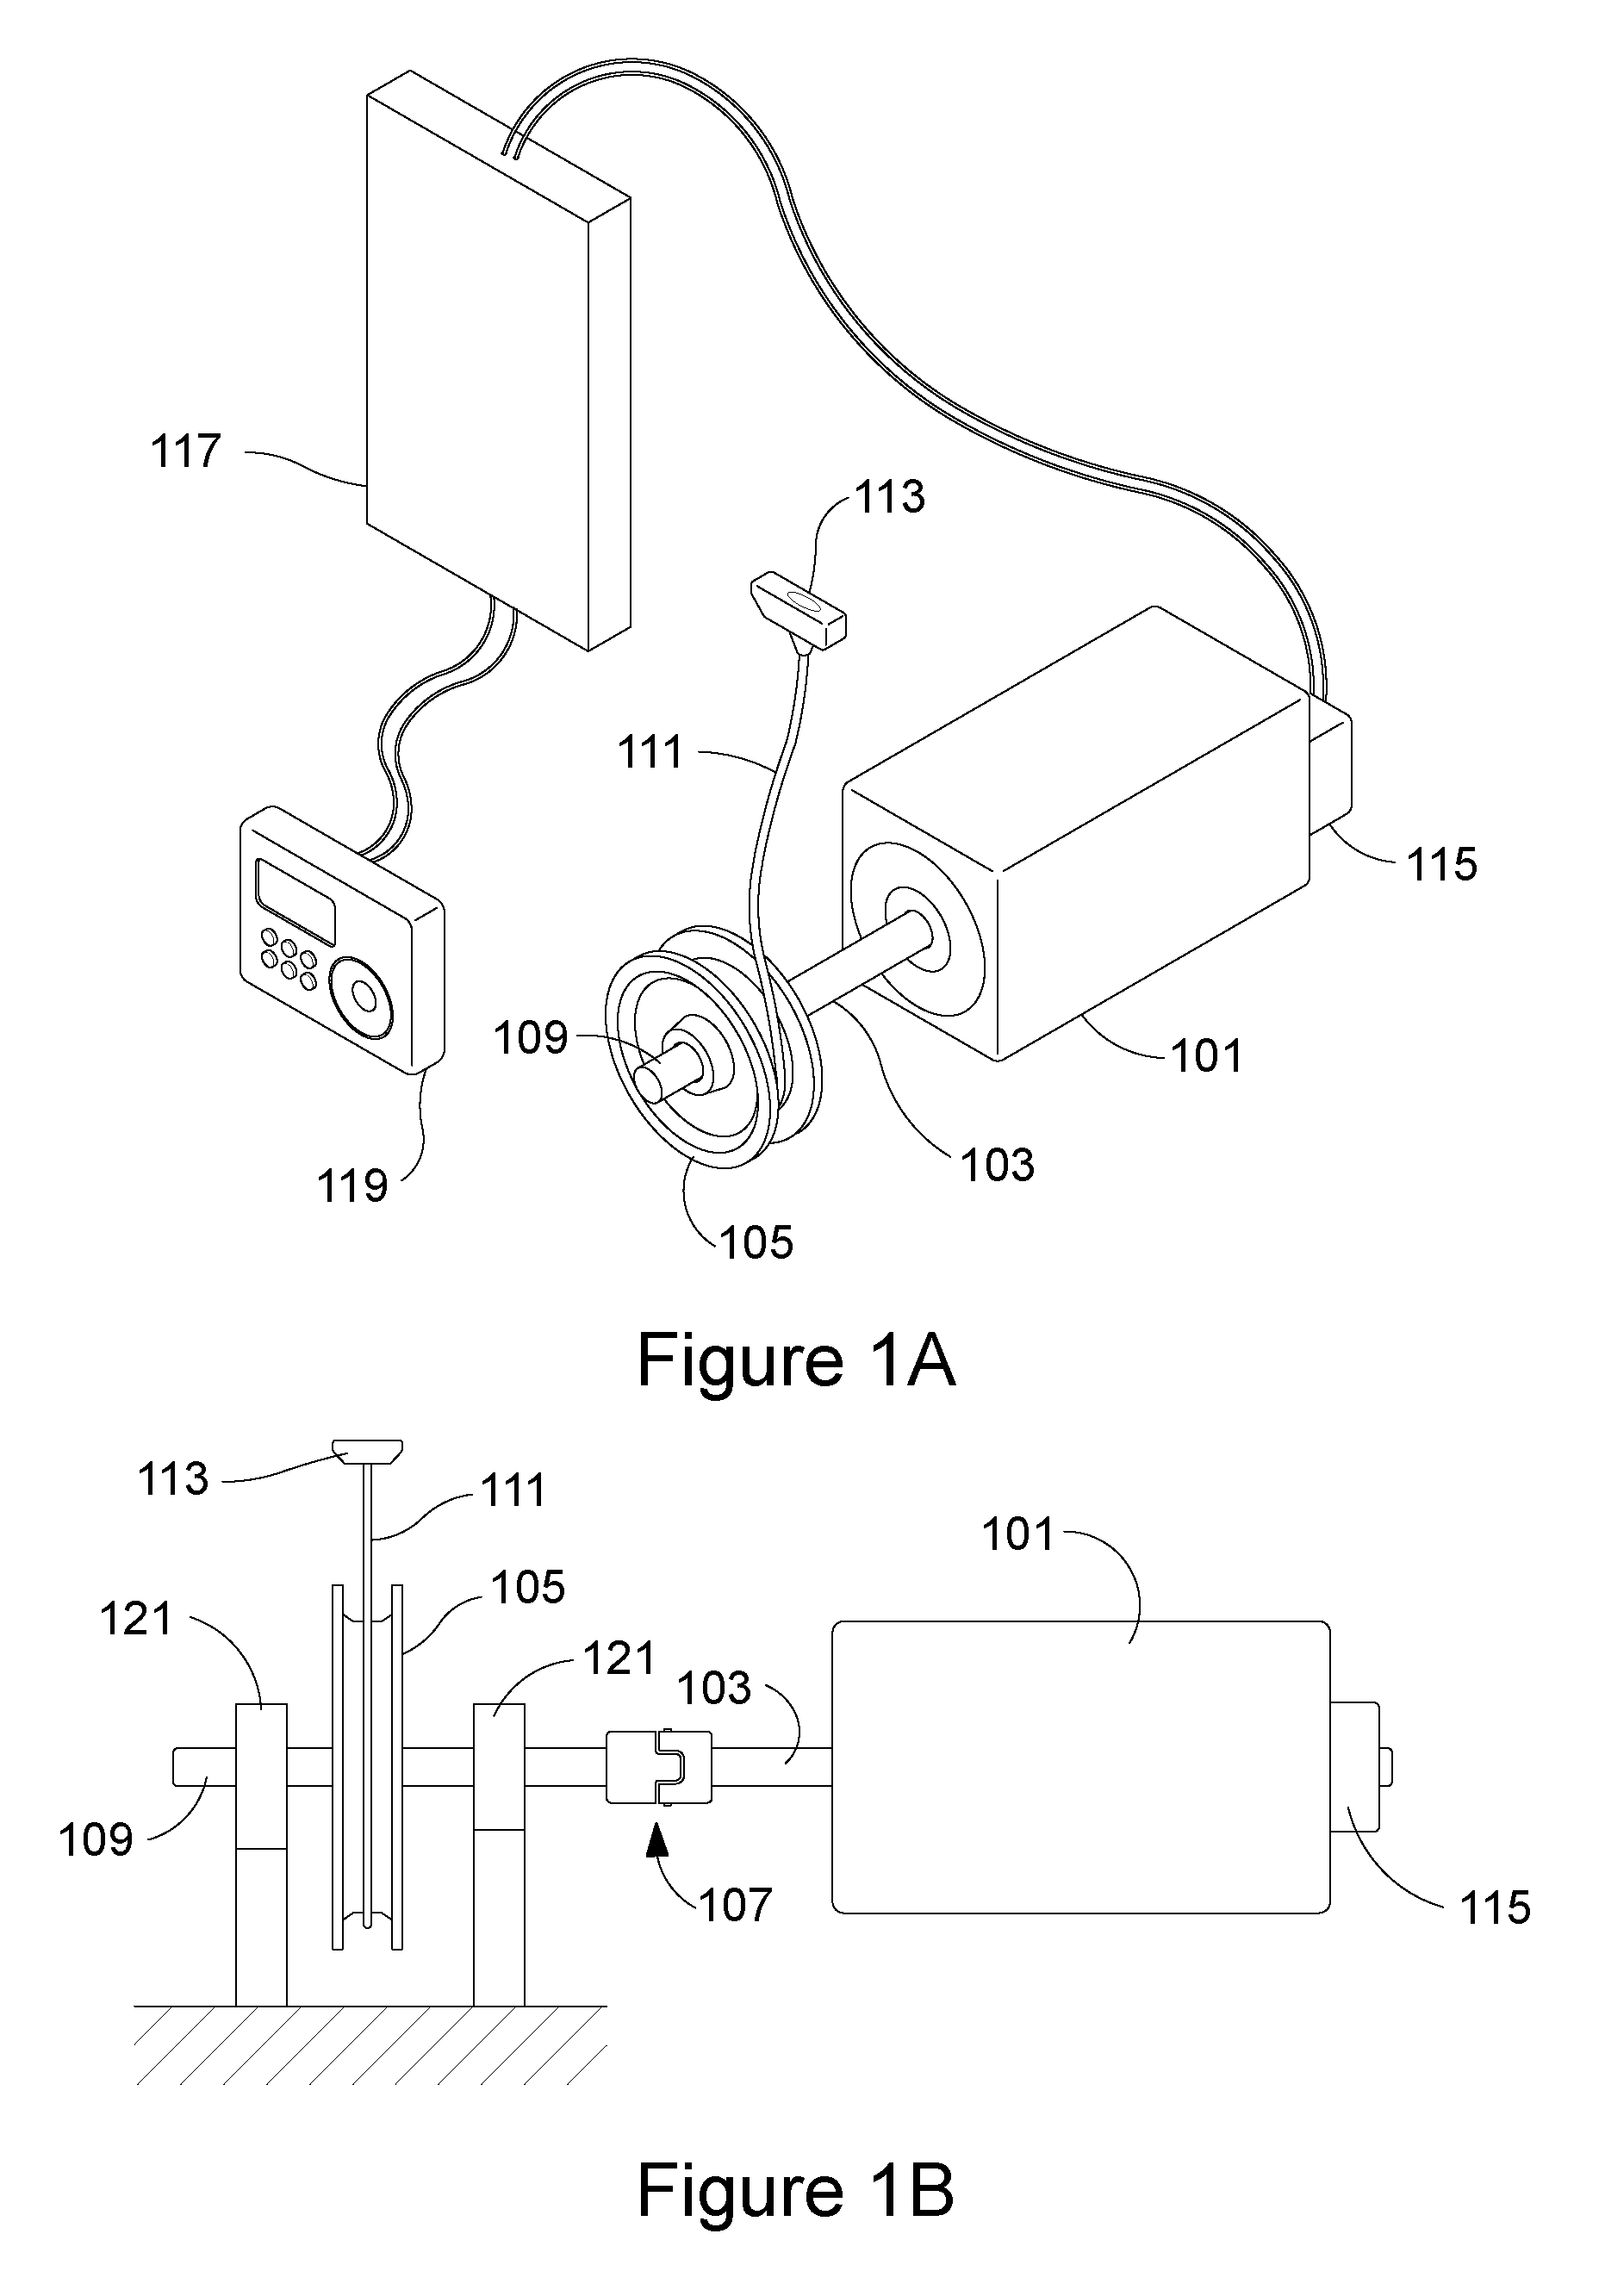 Apparatus and System for a Resistance Training System